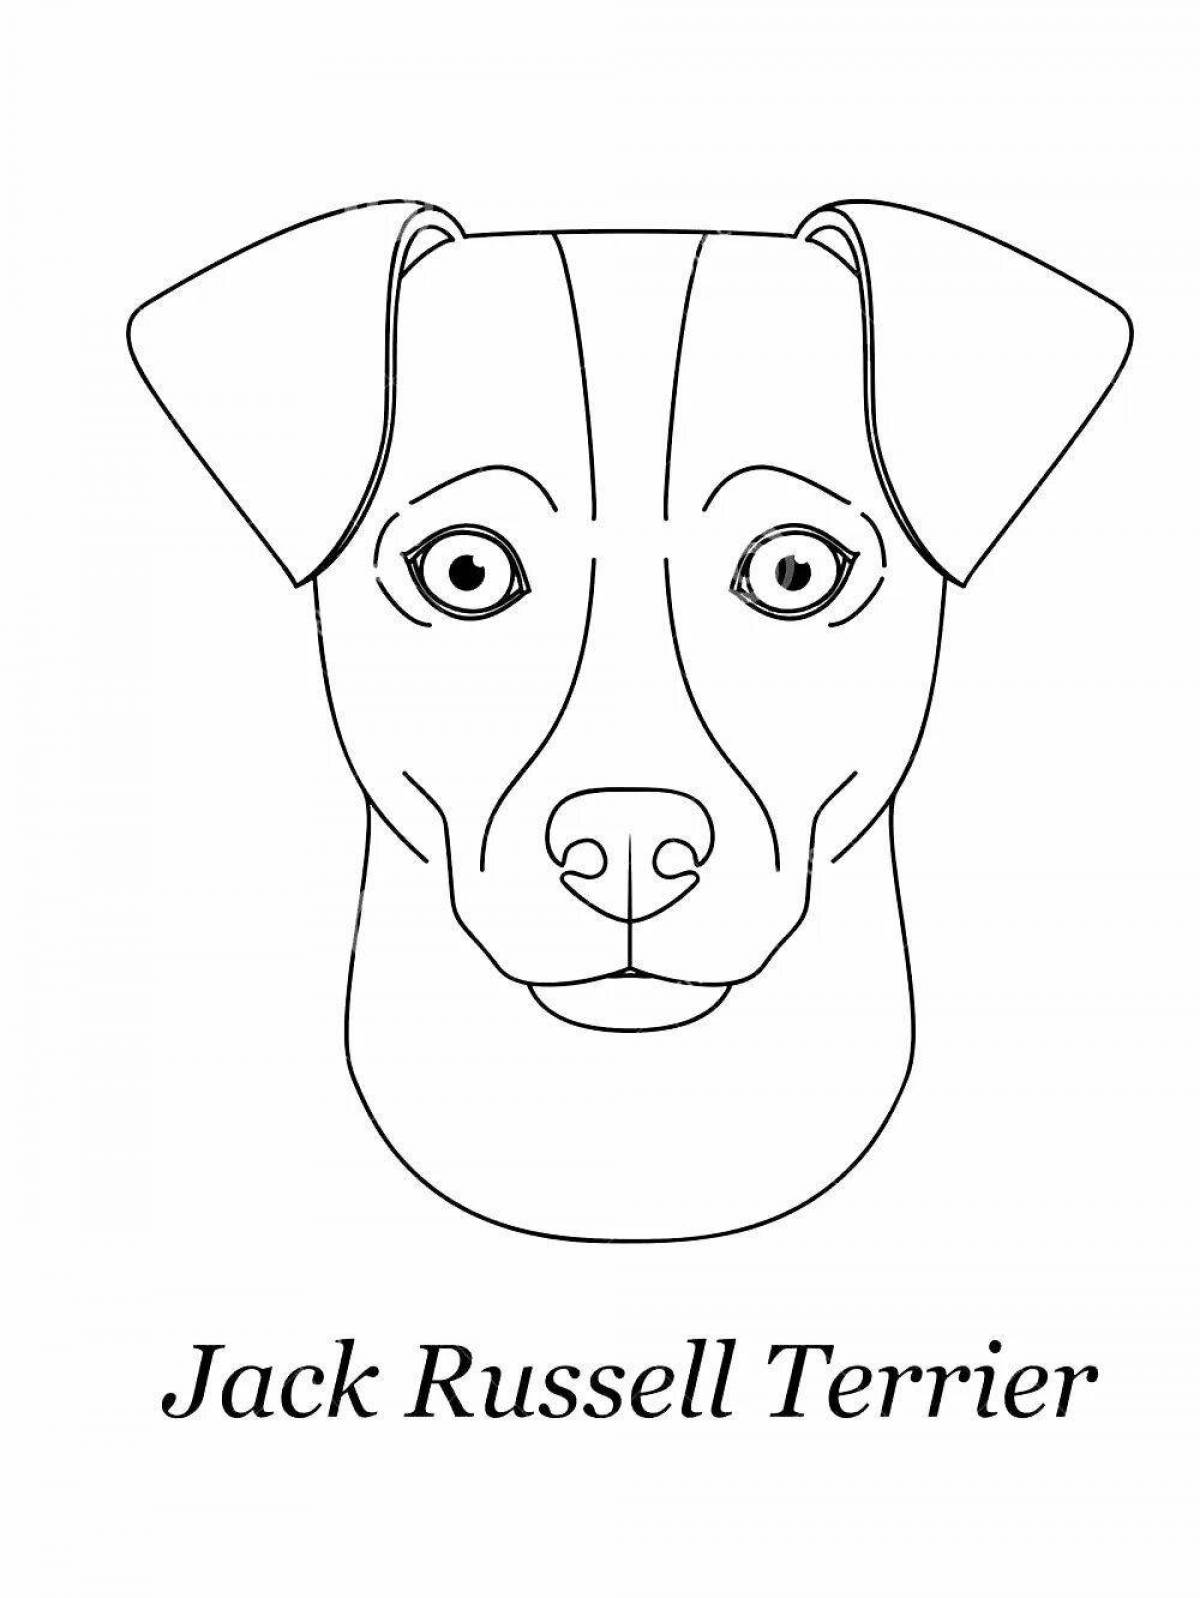 Jack Russell Terrier coloring book